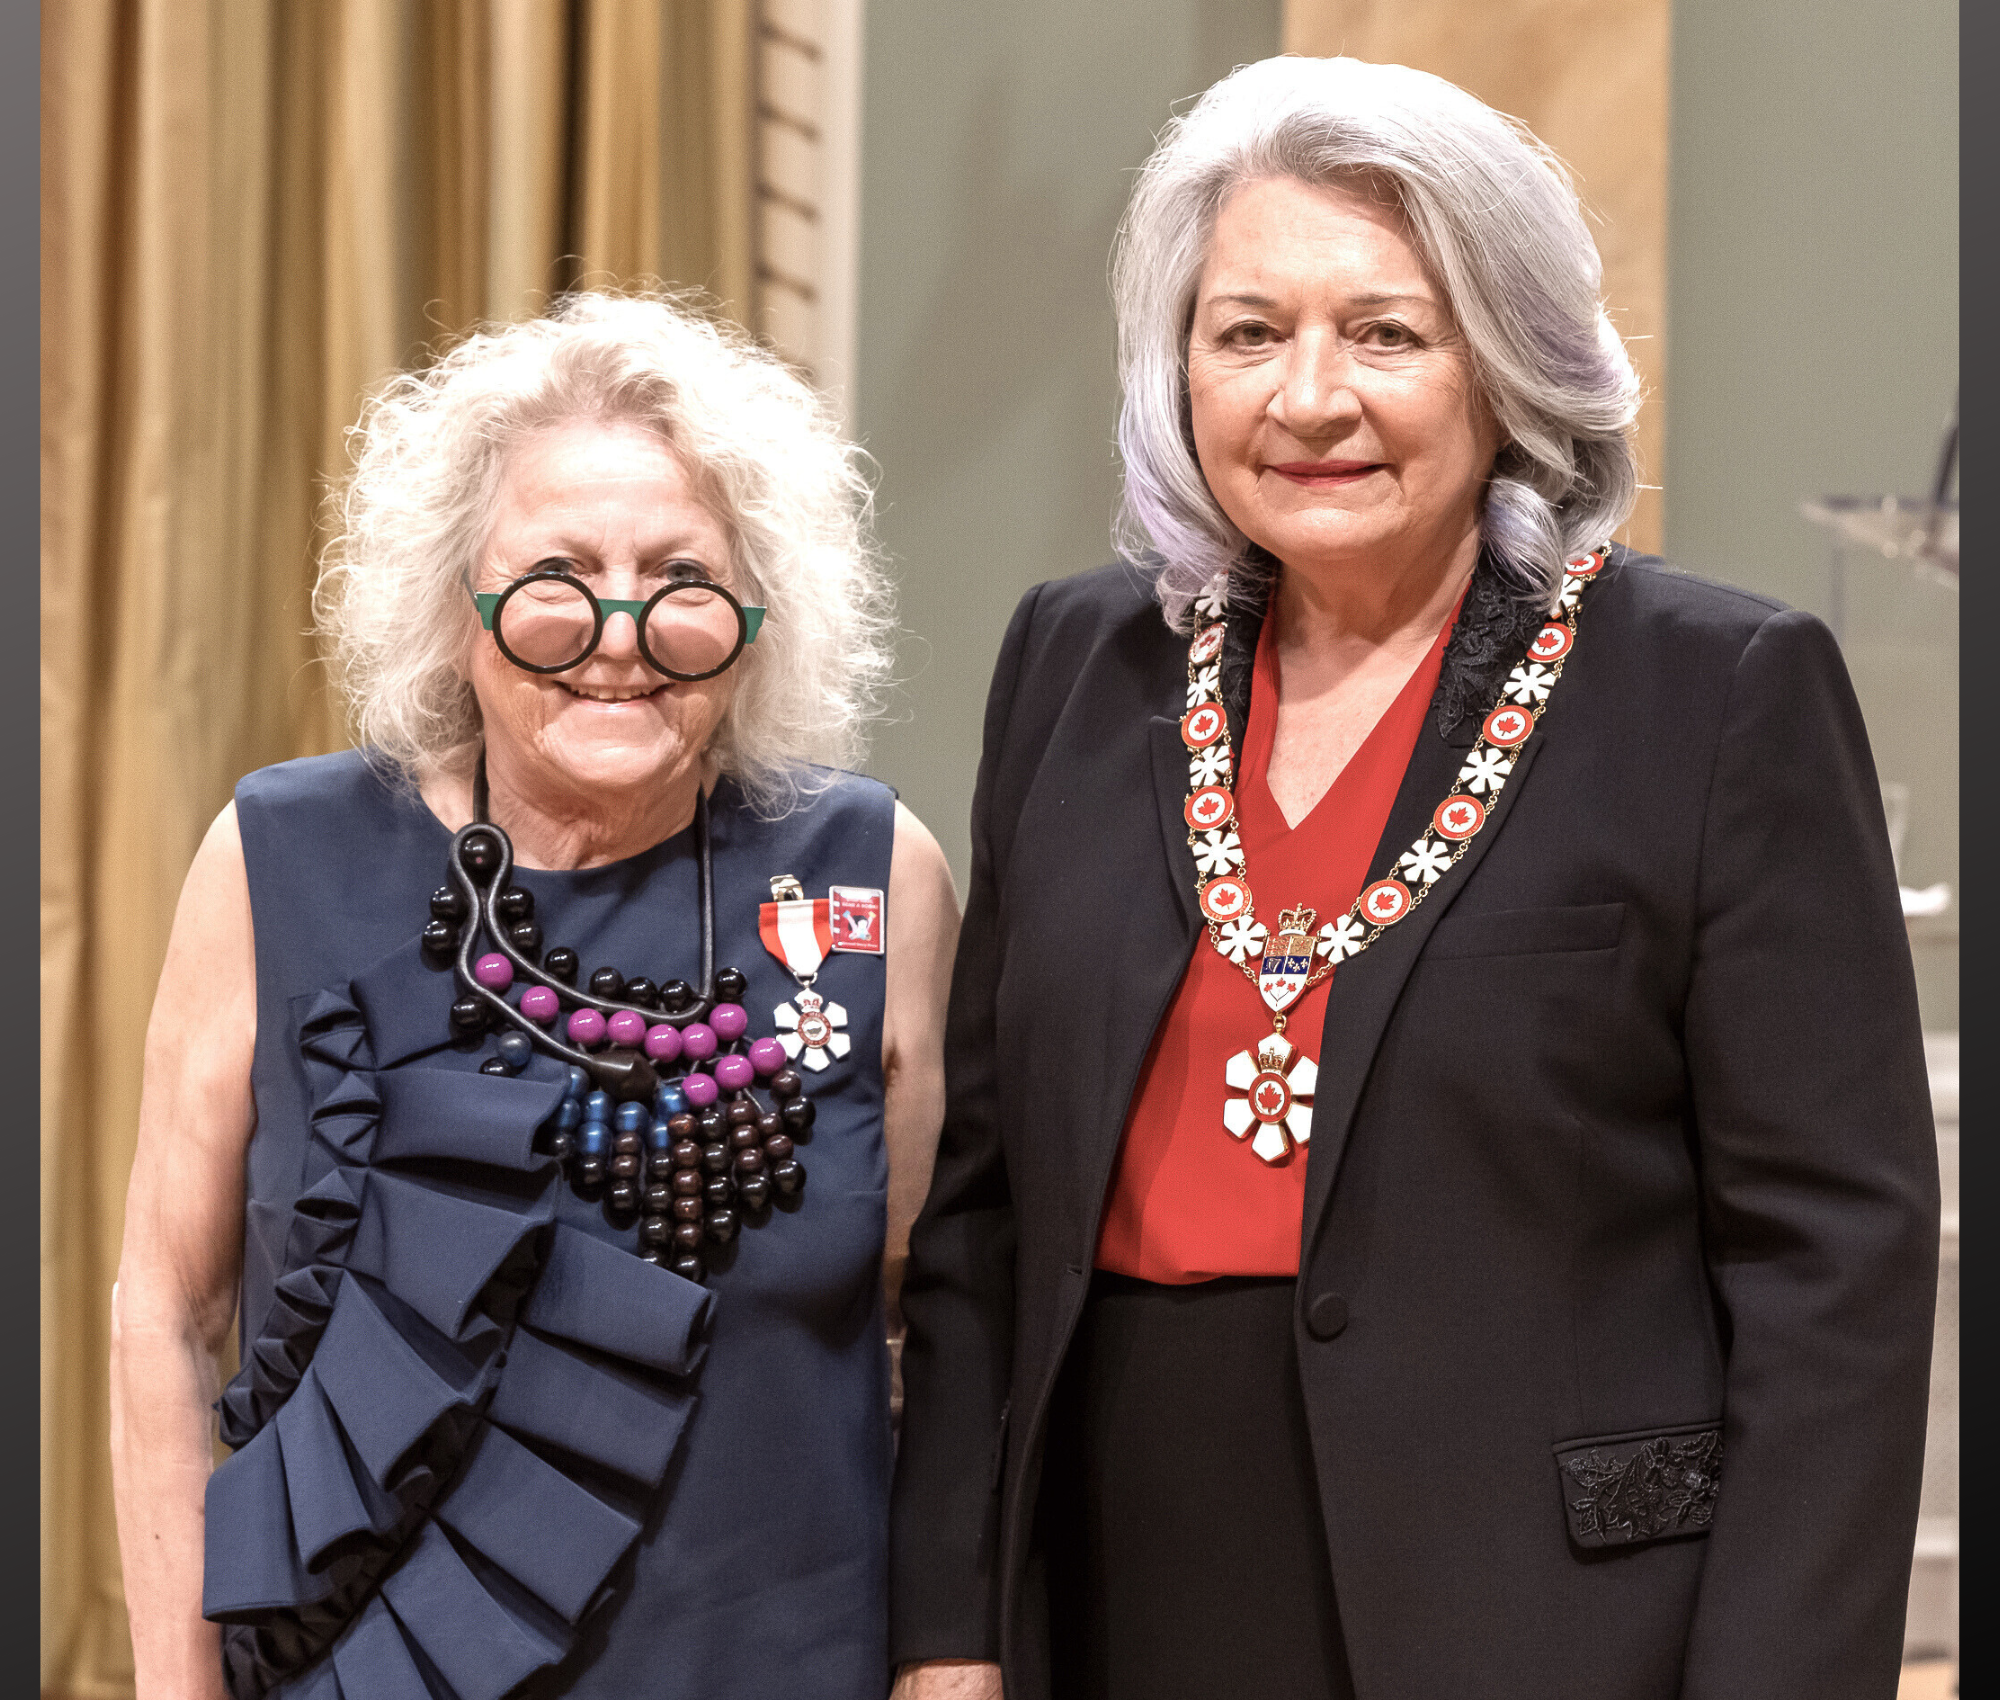 Margie Wolfe received the Order of Canada!